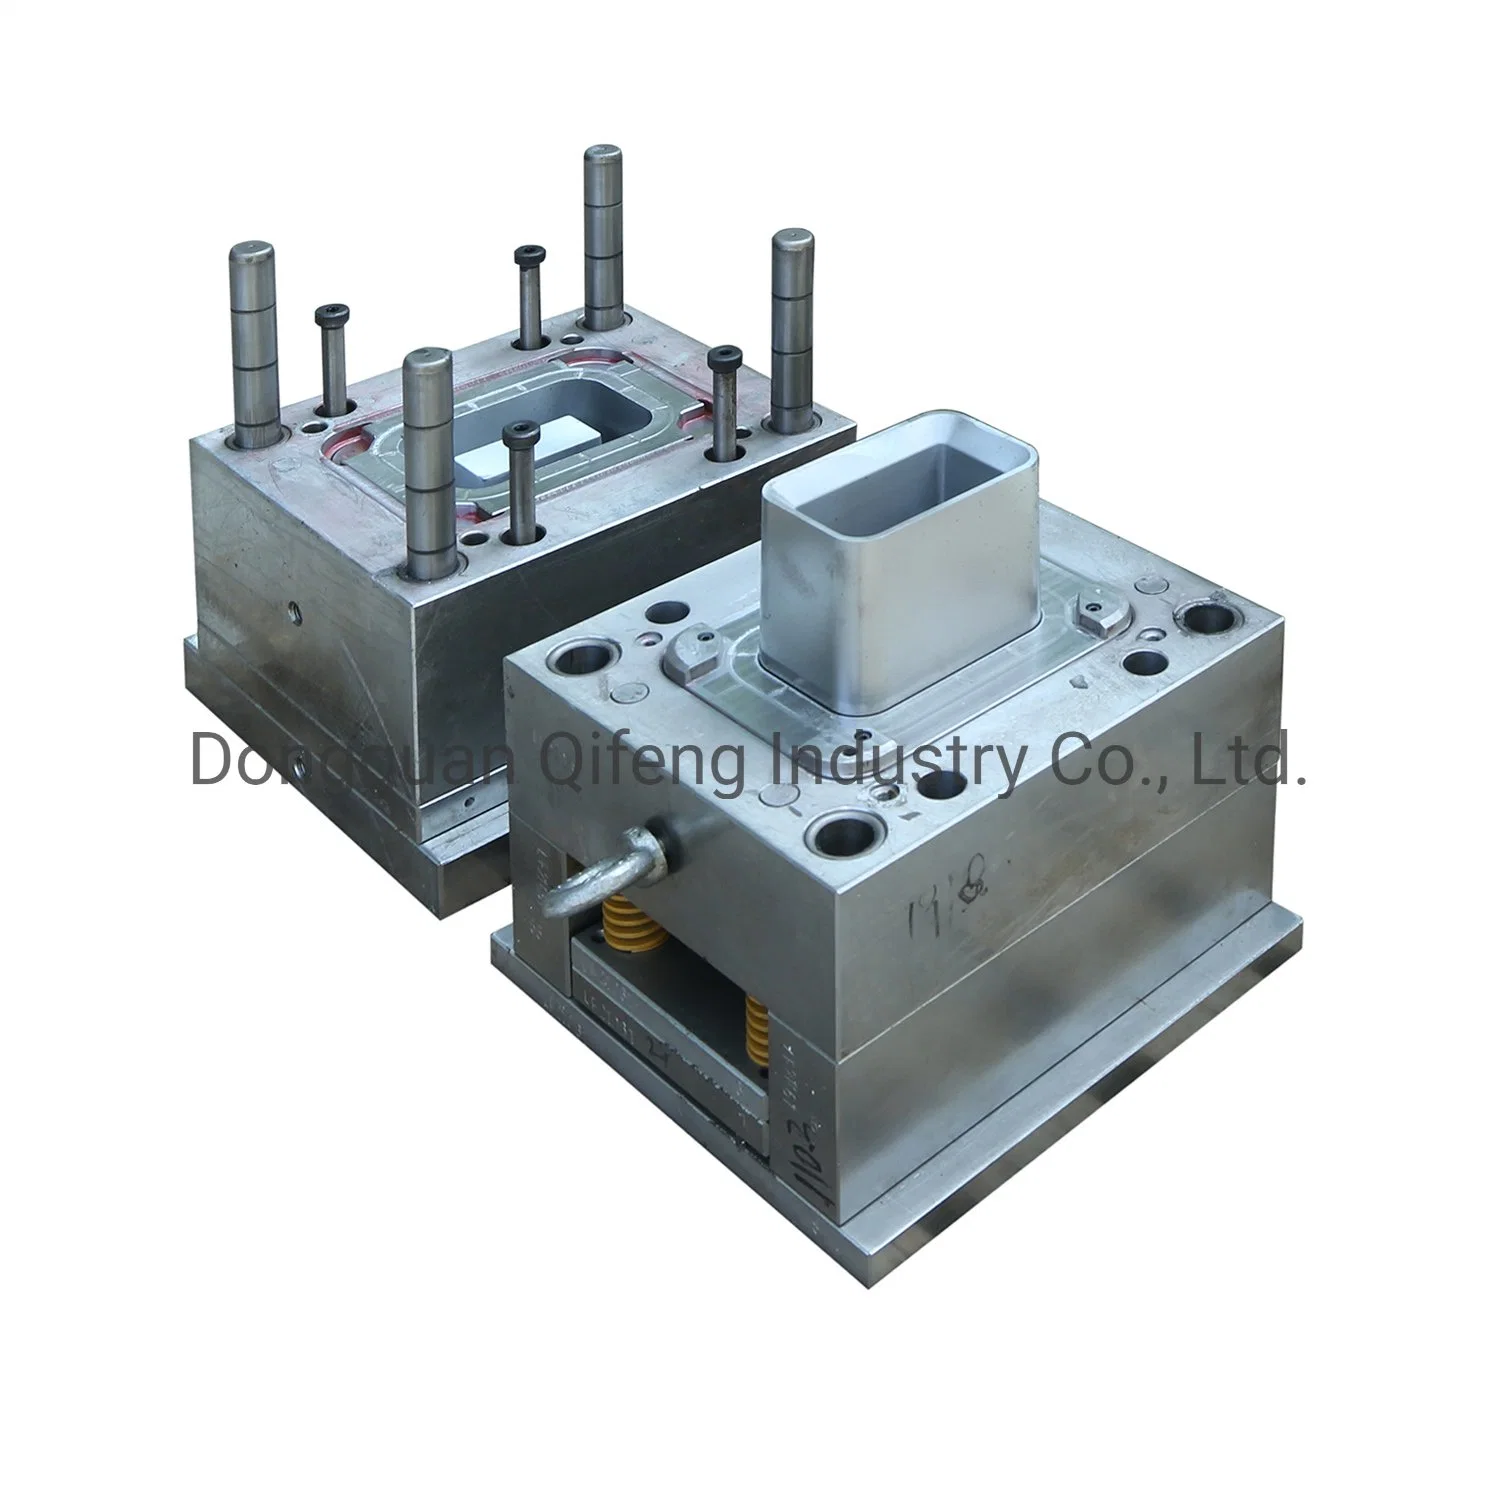 Custom Plastic Injection Molding Company Supply Hotsales Injection Tooling Matrix Mold Spare Parts Consumer Products Extrusion Service and OEM Assembly